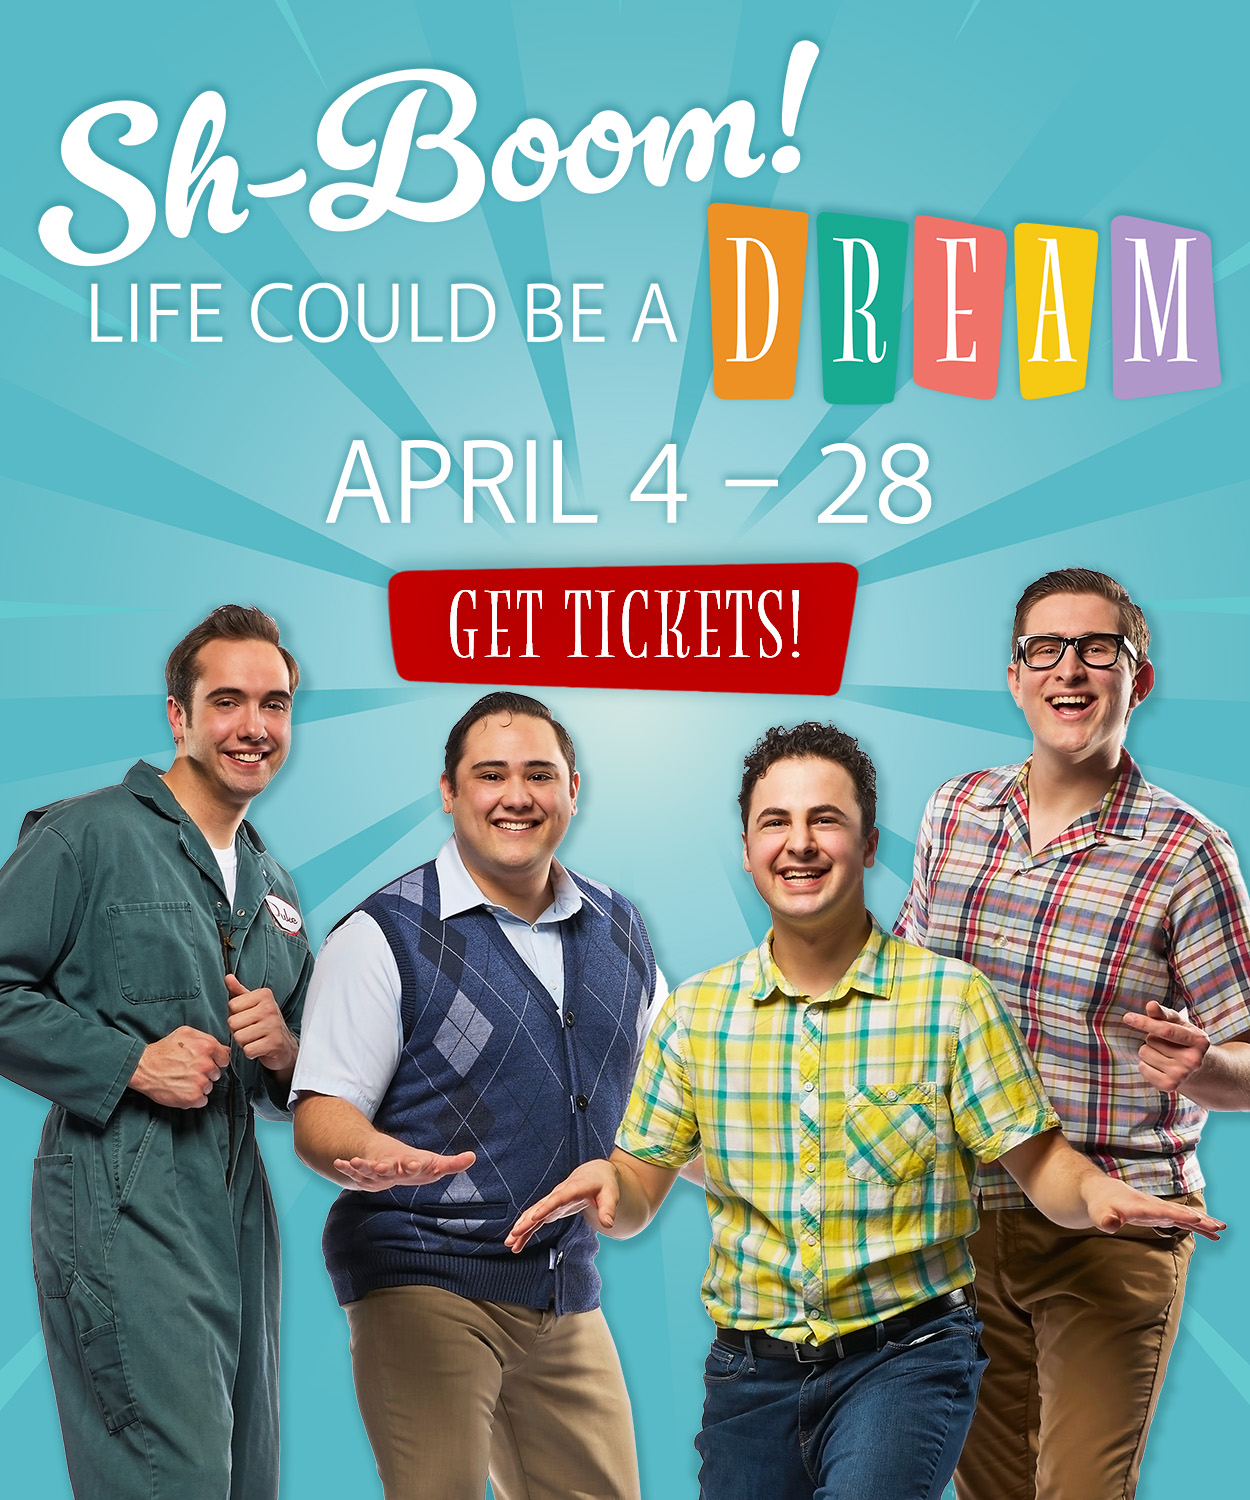 Sh-Boom, Life Could Be a Dream. April 4 through 28. Get tickets by clicking here.